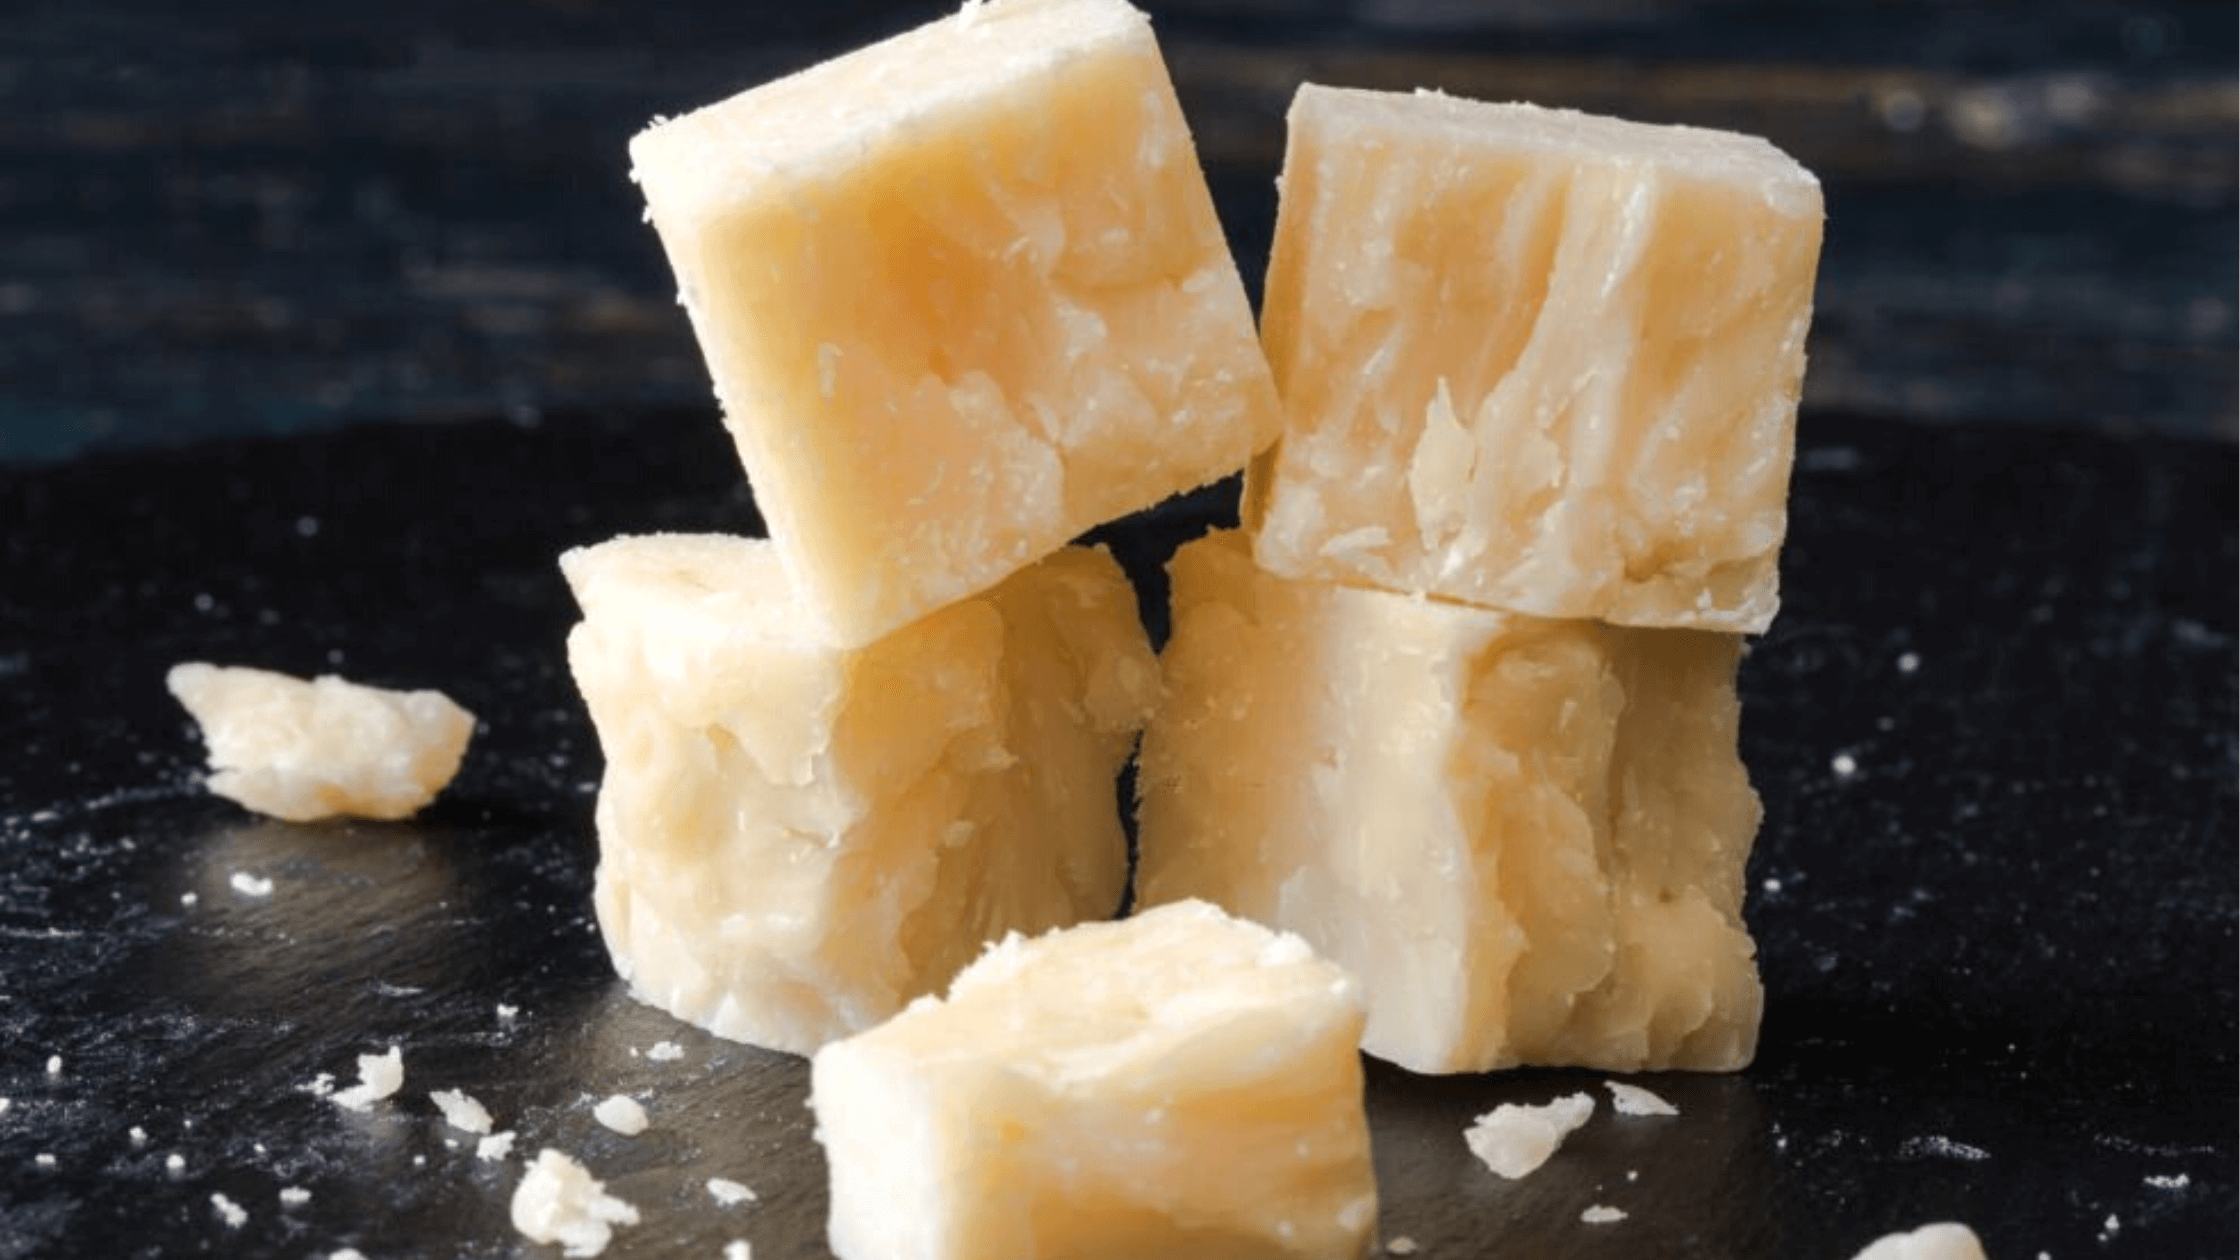 Cheese Helps To Prevent Bone Loss- Study